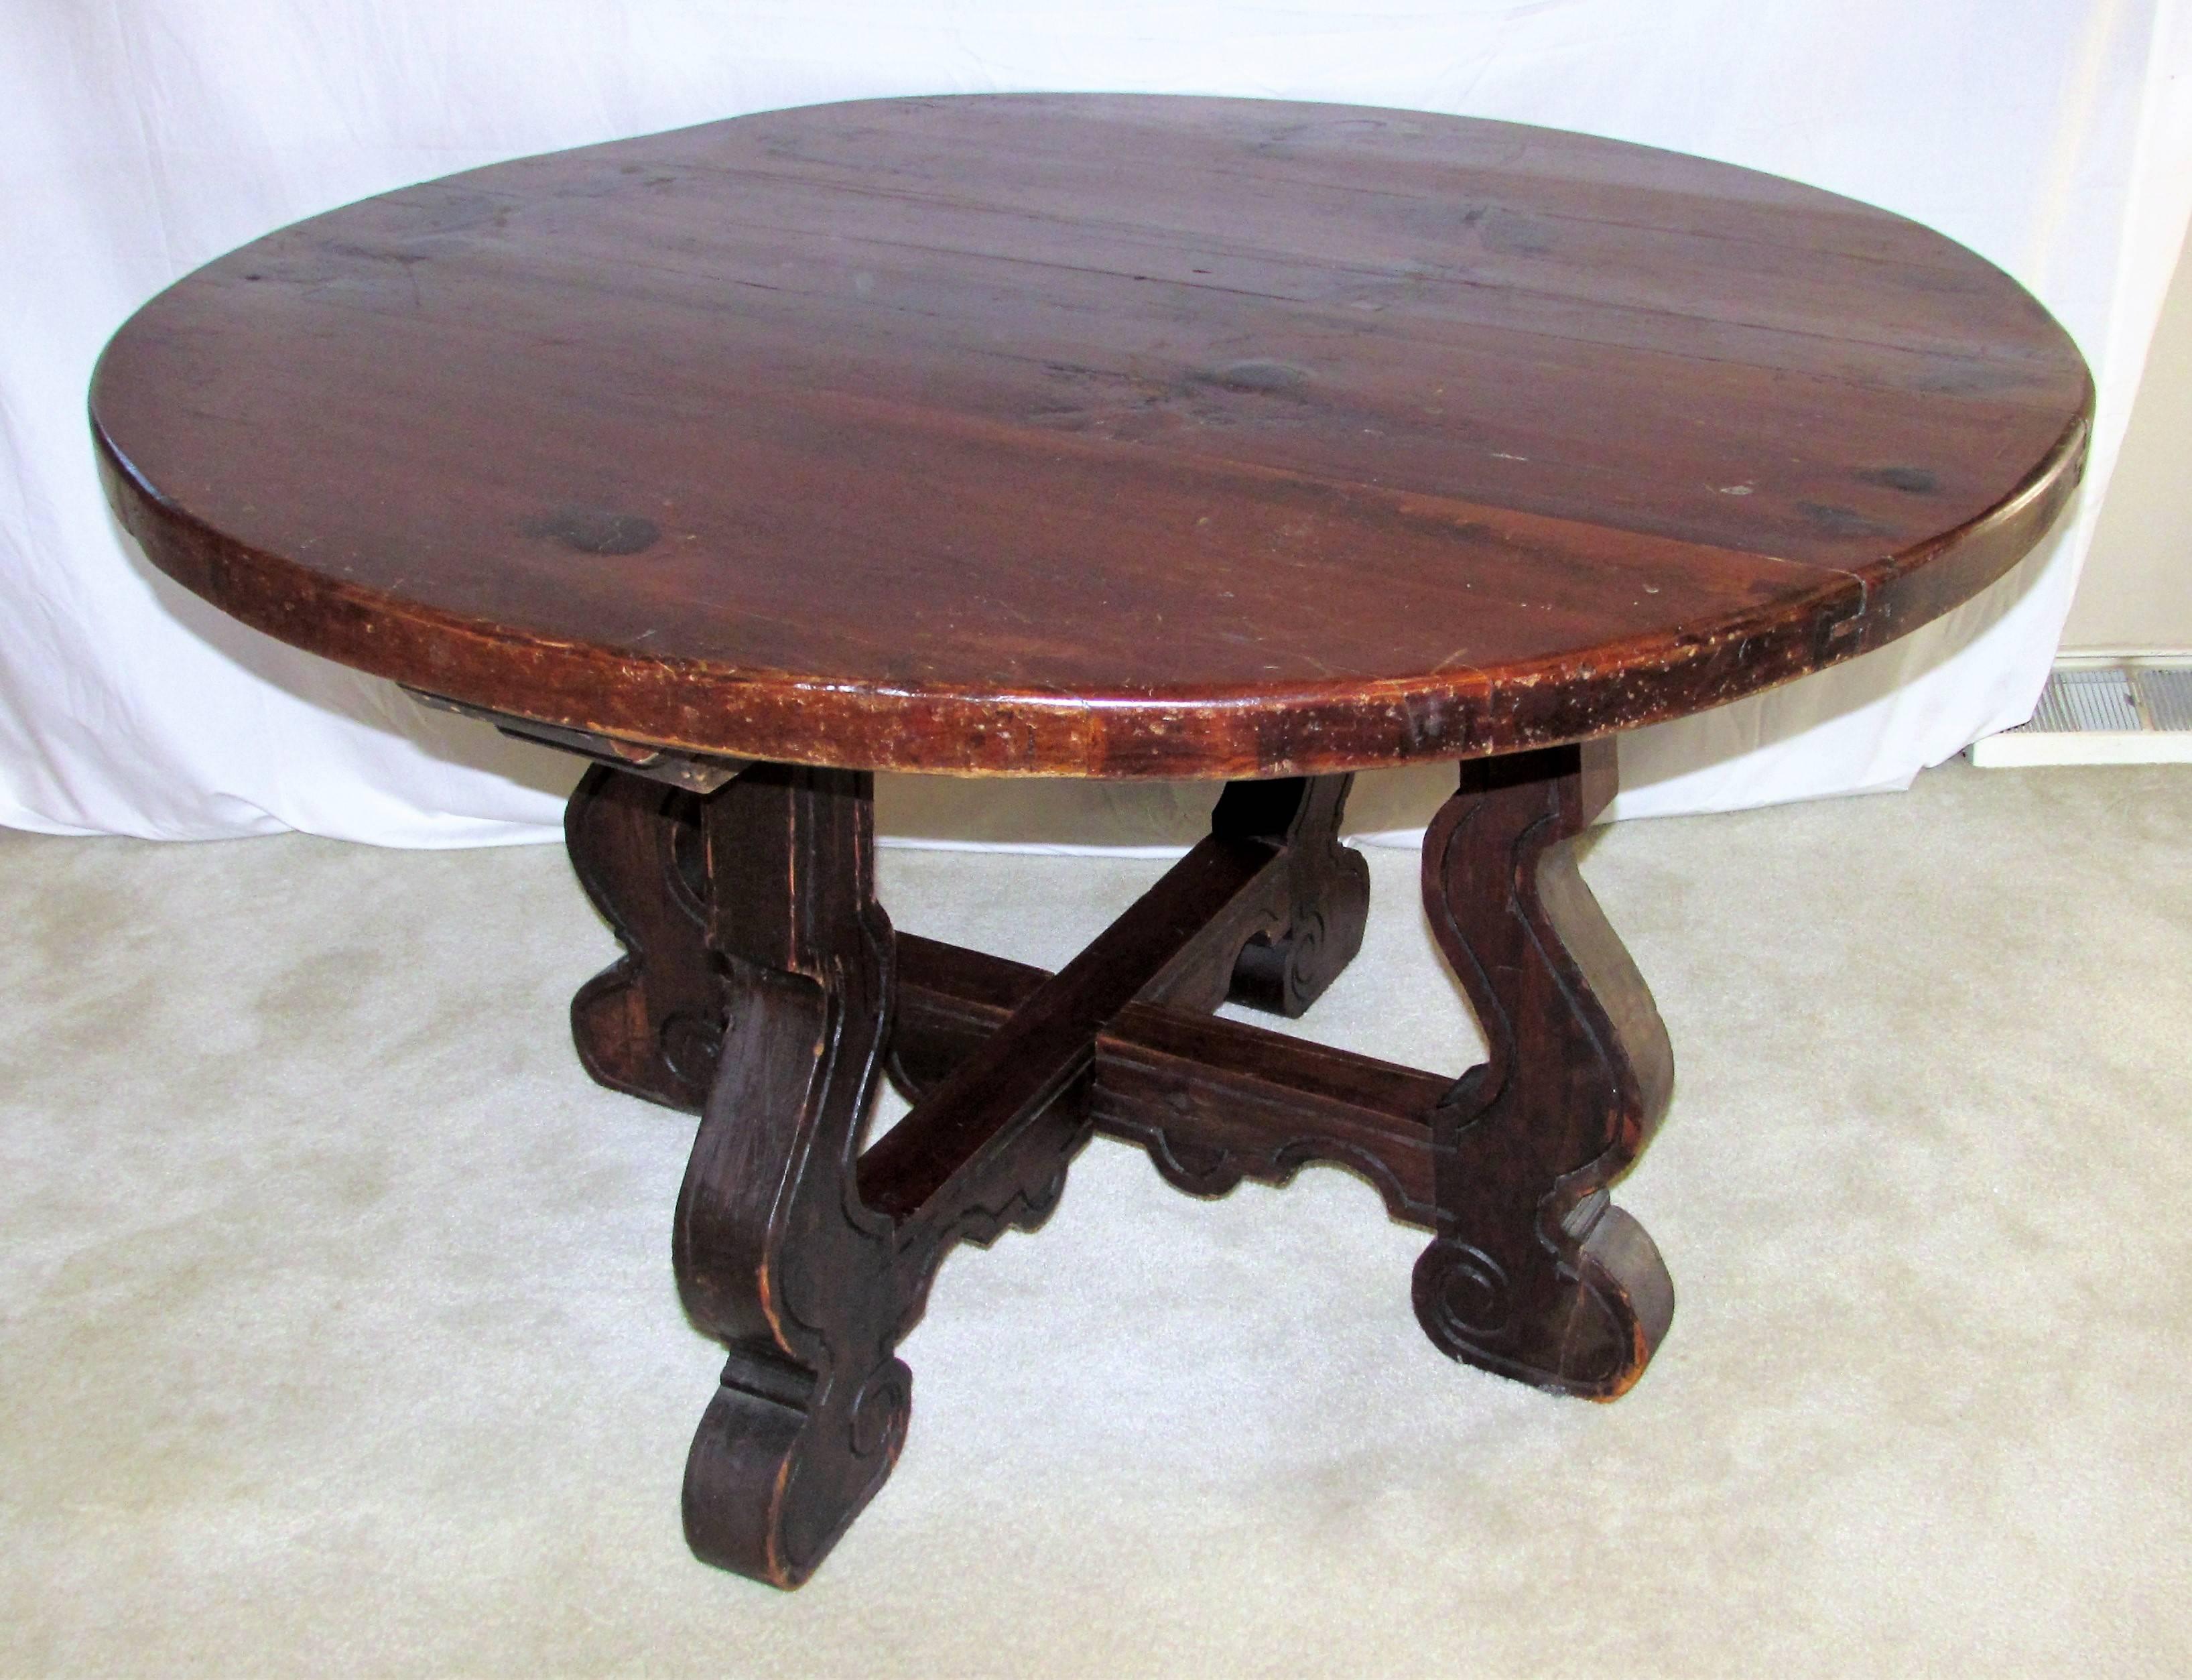 This antique Catalan style table is from the 1800s to the turn of the century. It has a wonderful thick, rustic, pine wood top. Catalan style tables were originally made to be disassembled easily due to the war in the Middle Ages, when nobility